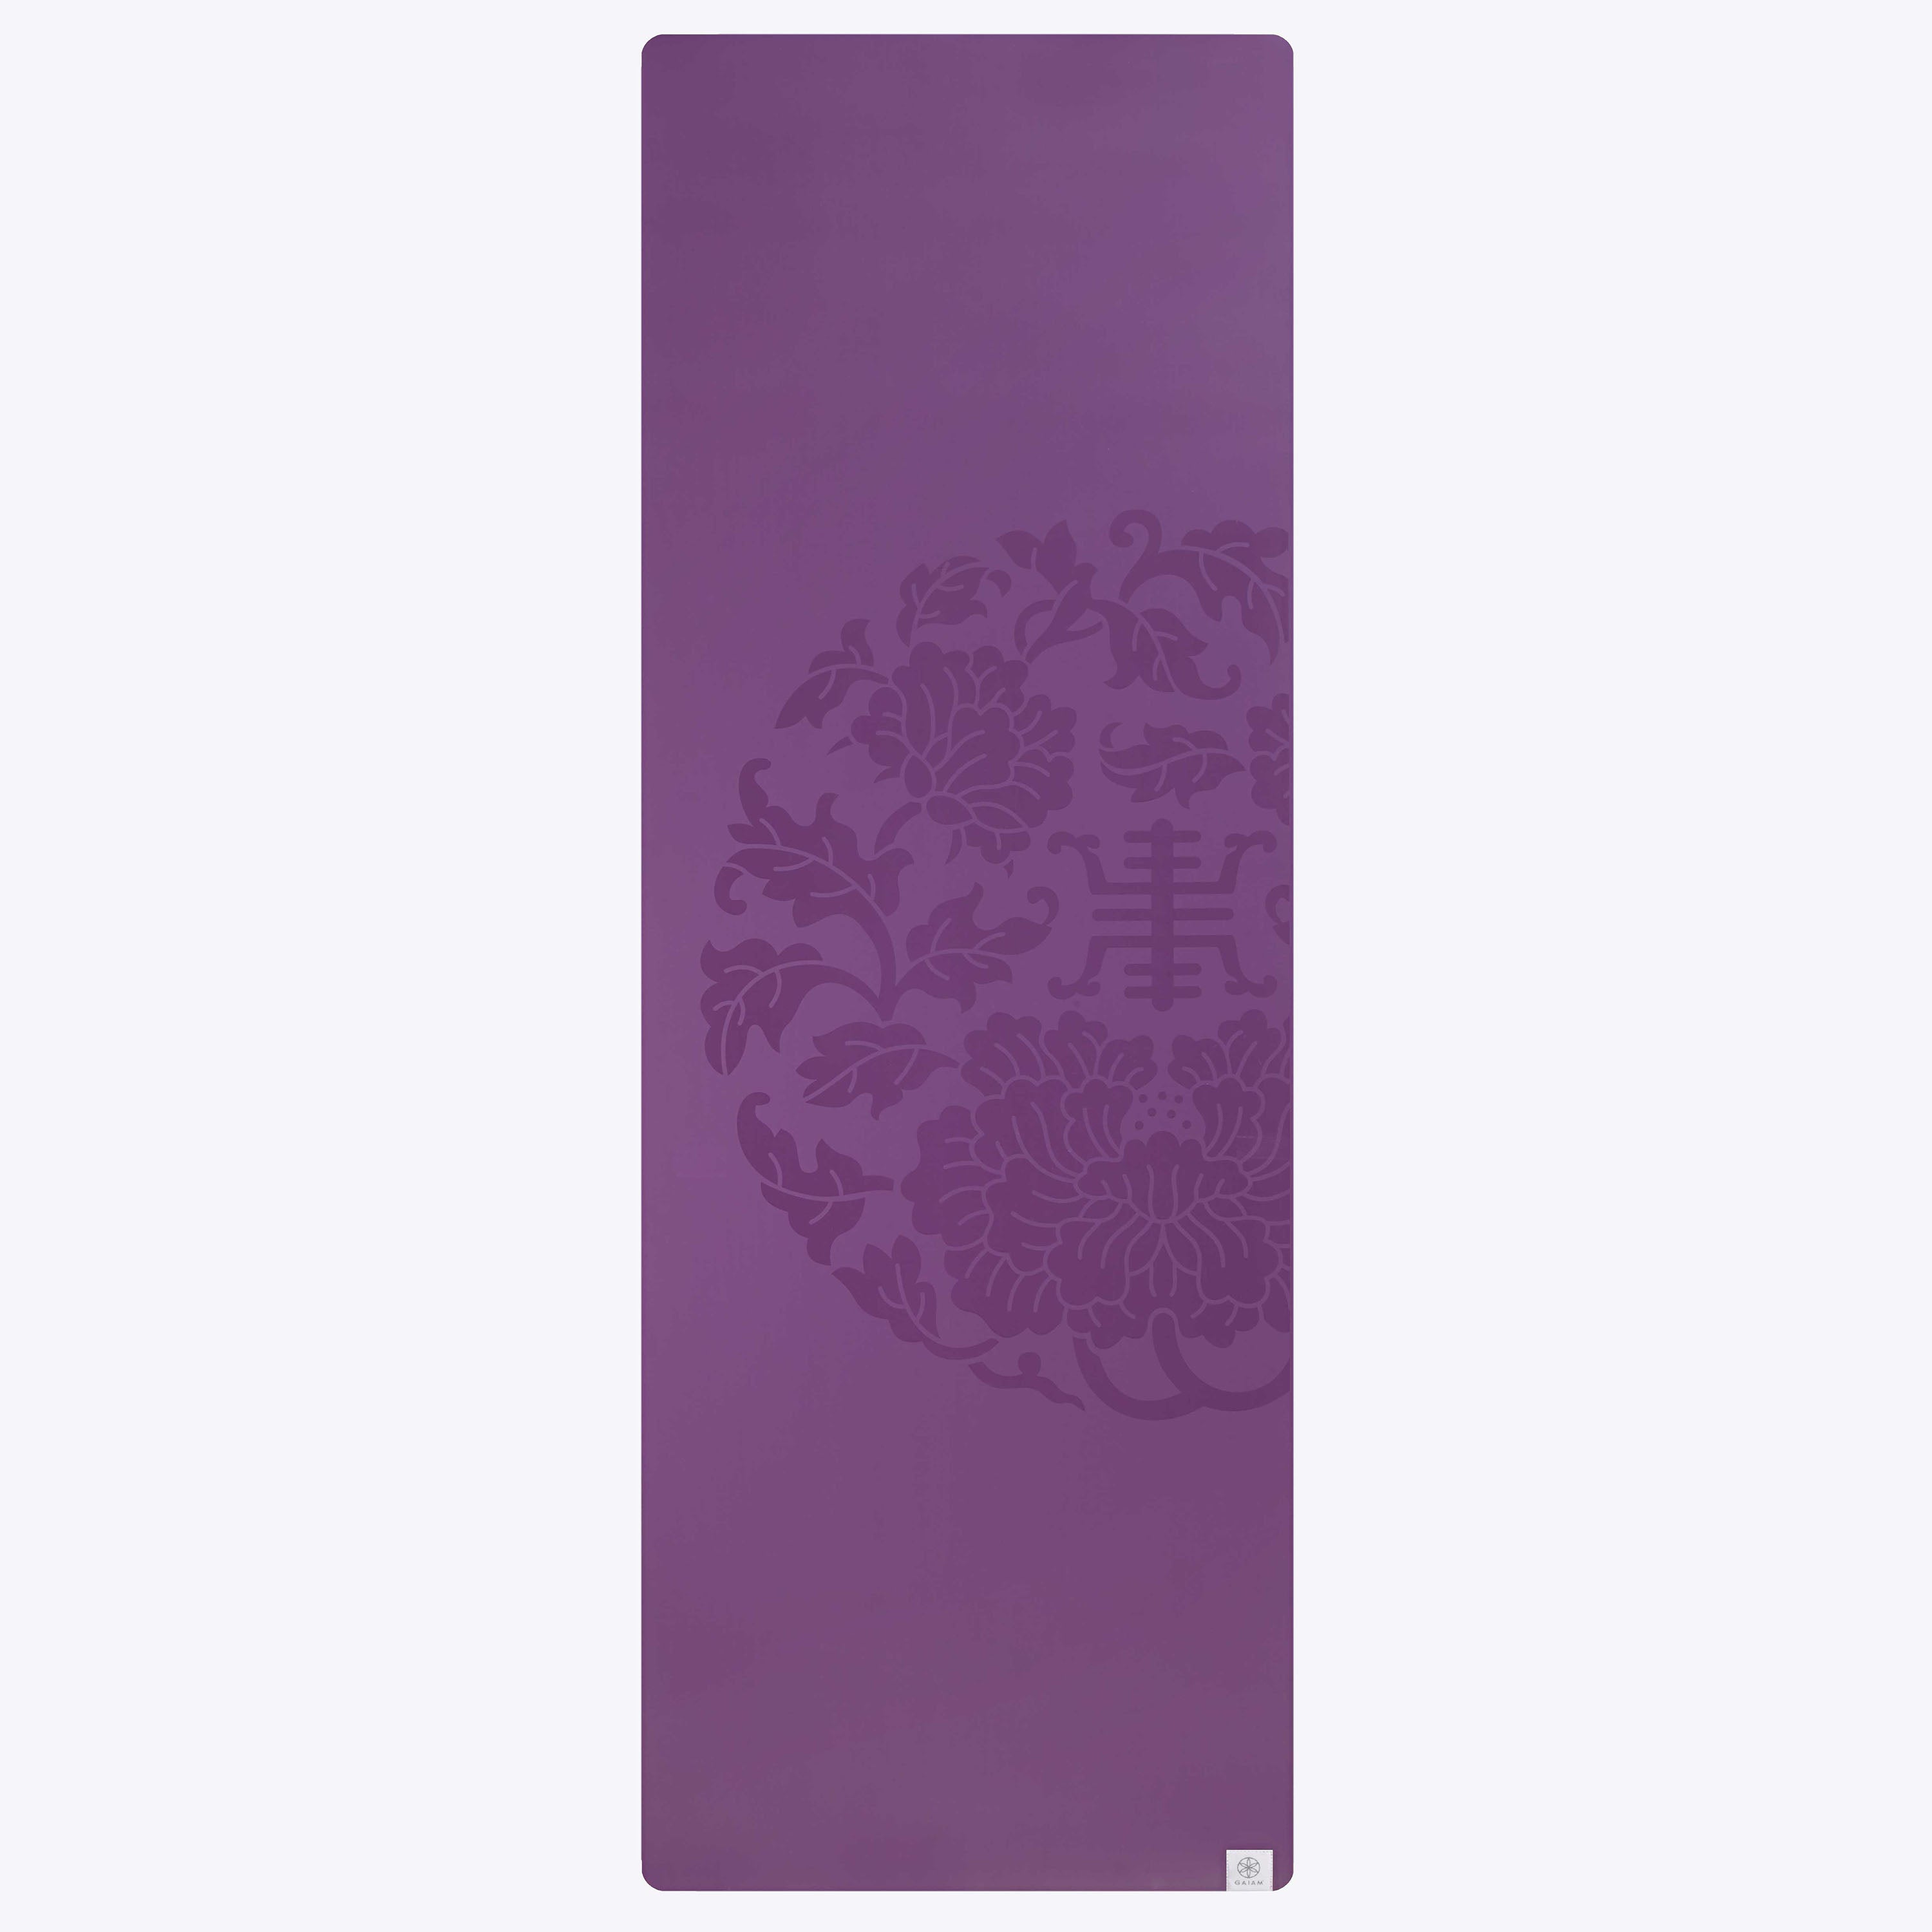  Gaiam Dry-Grip Yoga Mat - 5mm Thick Non-Slip Exercise &  Fitness Mat For Standard Or Hot Yoga